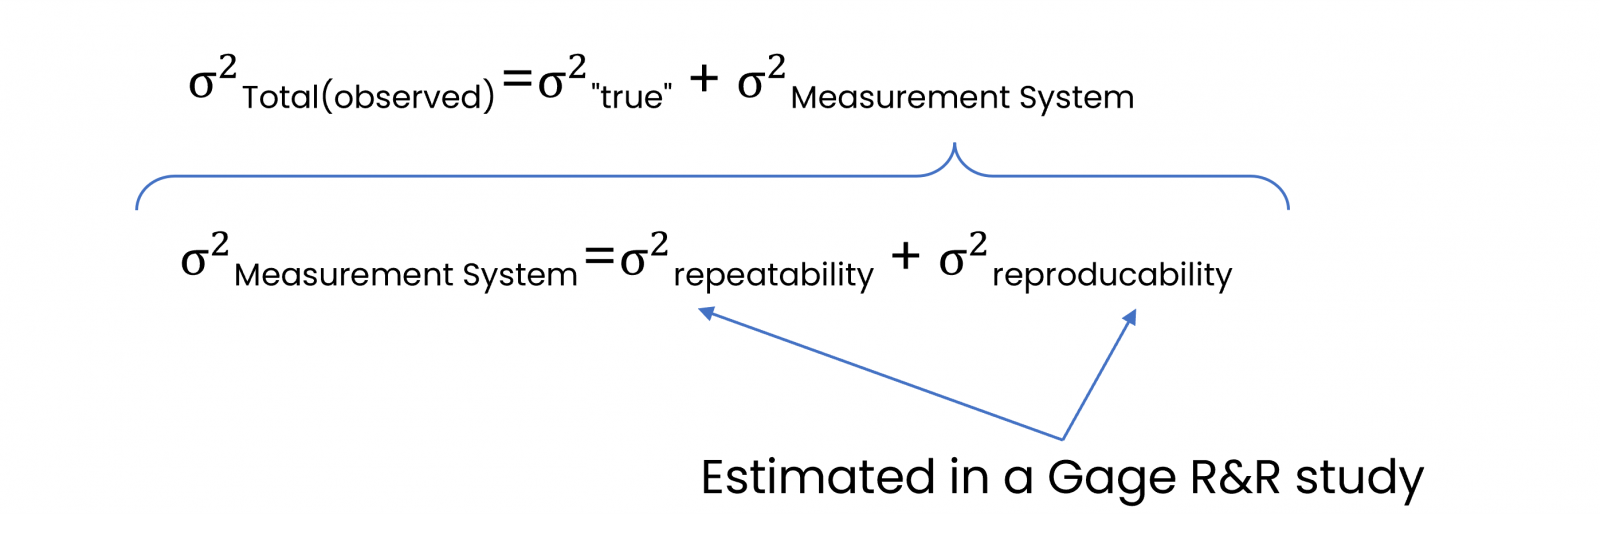 How to measure precision of a measurement system in a Gage R&R Analysis. Pragmatic explanation & formula.  